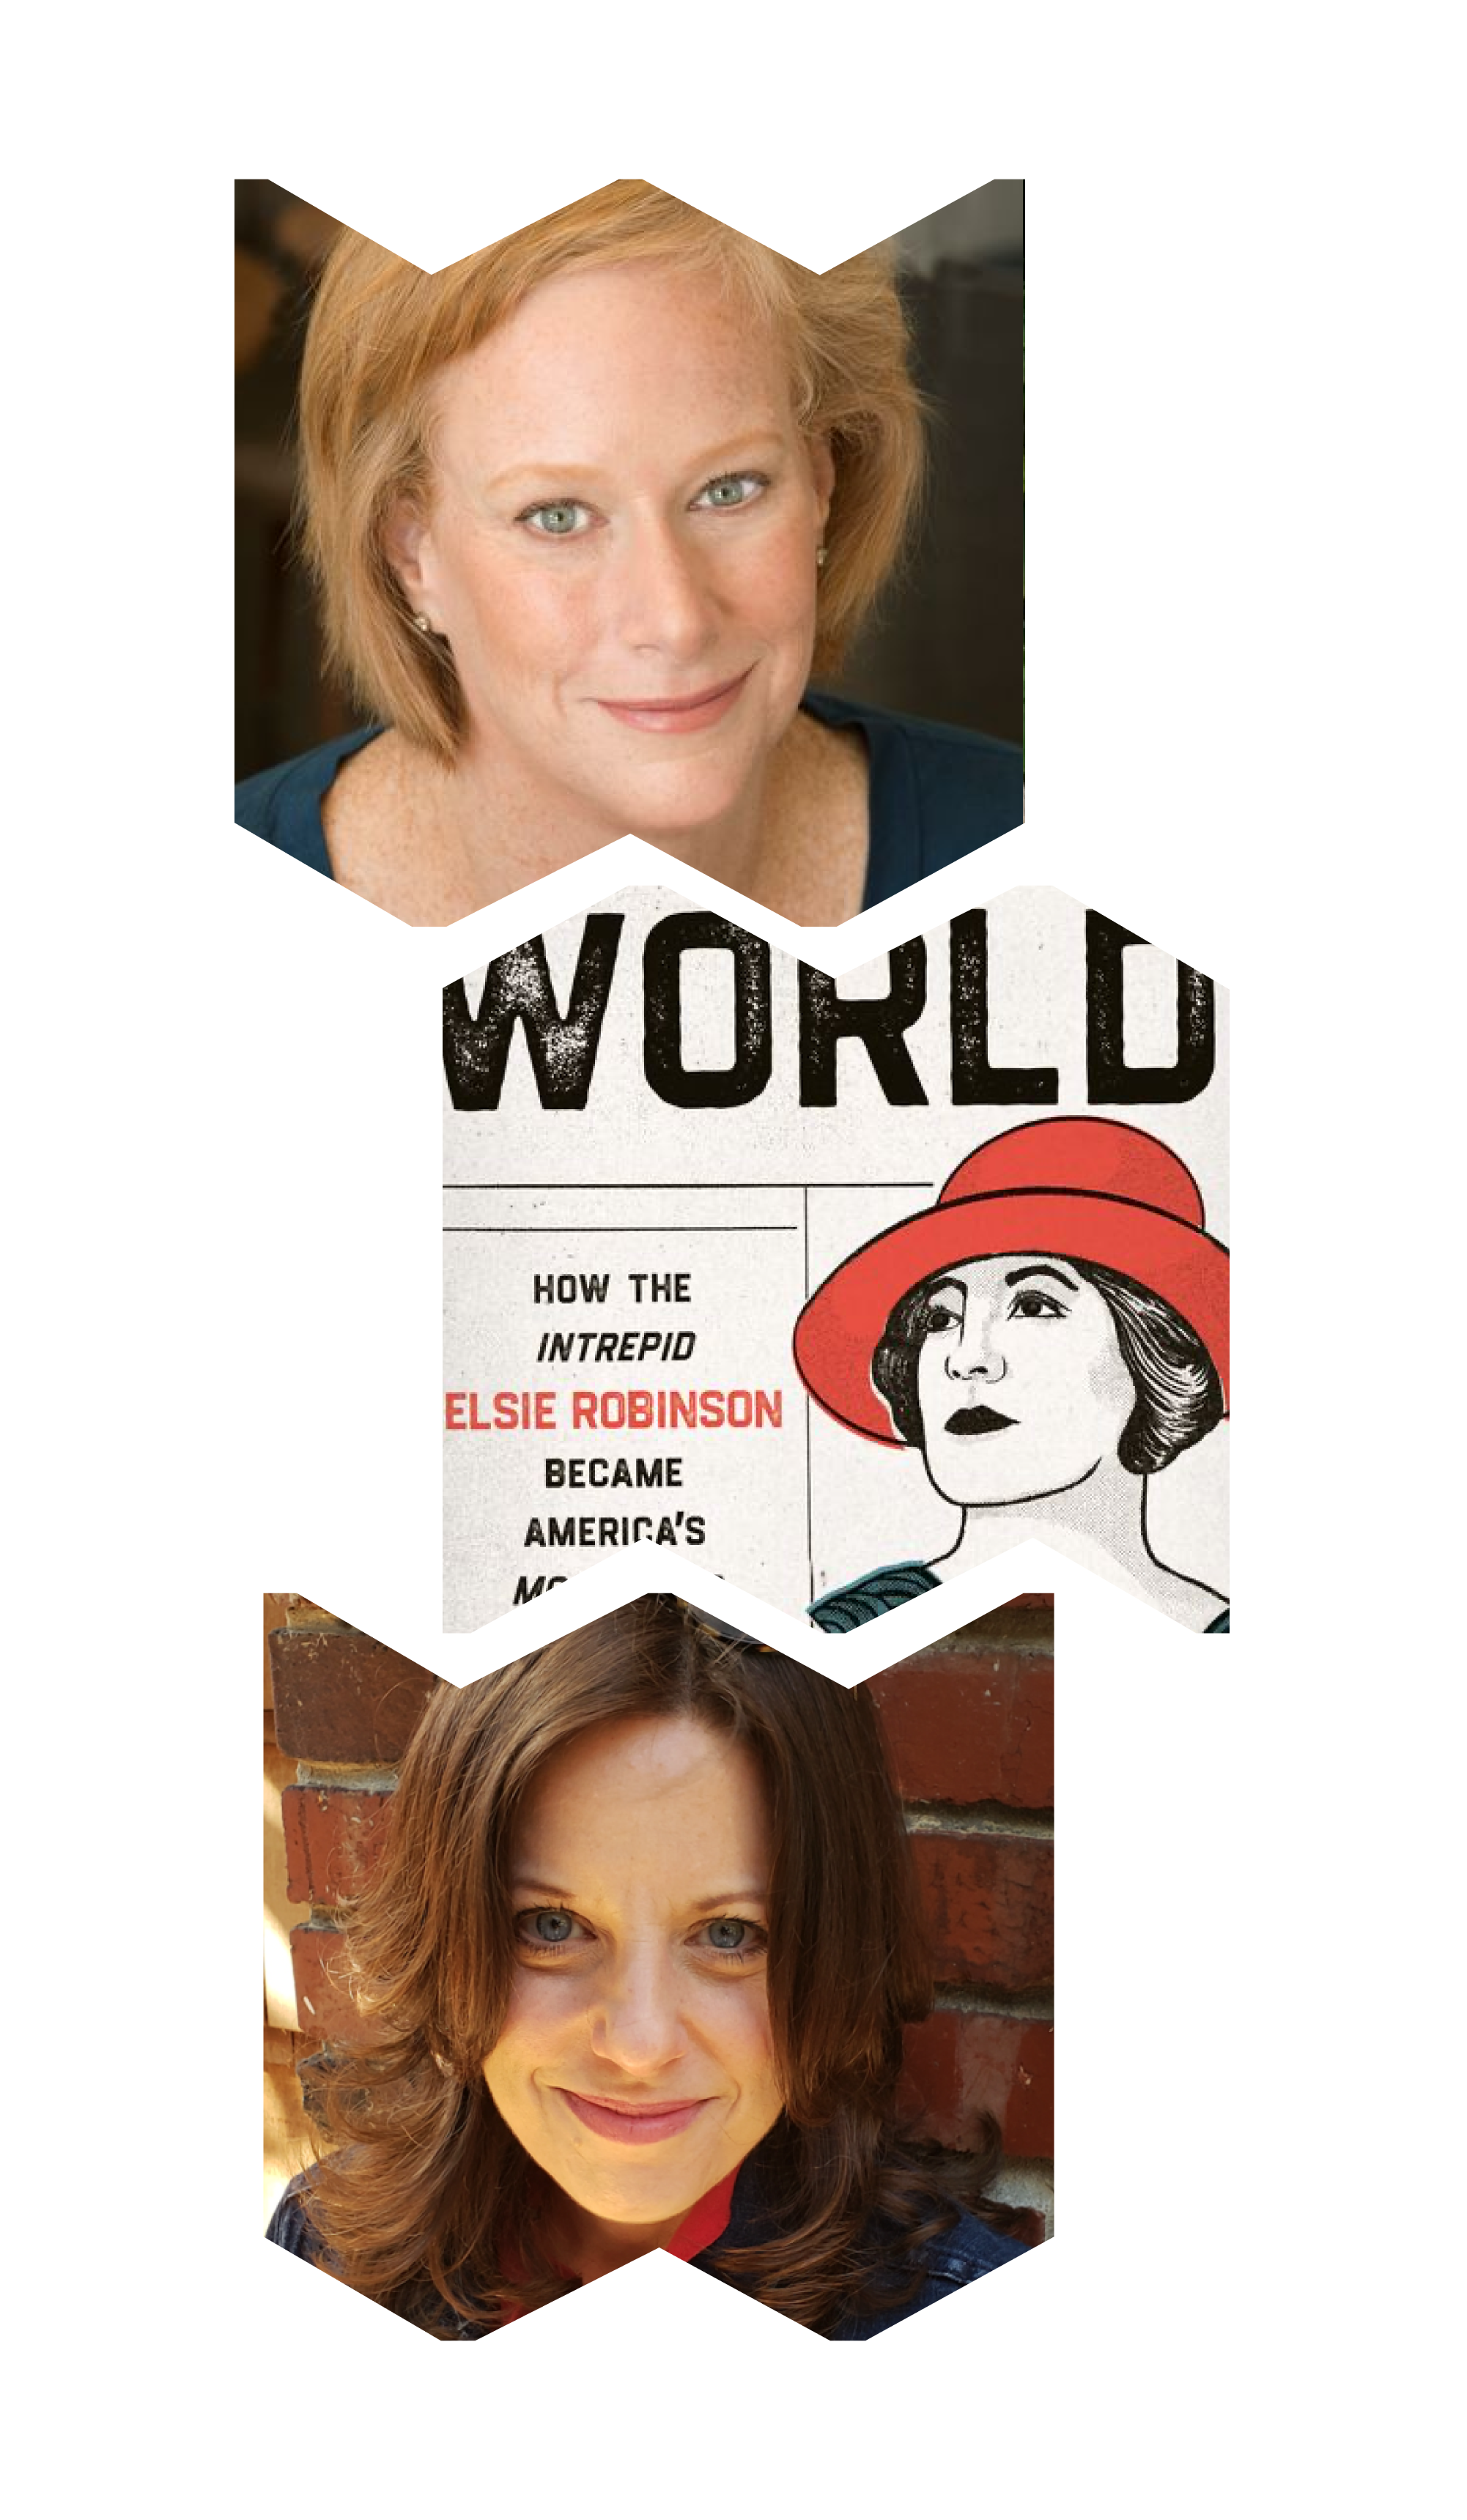 Top "W" frame with headshot of Allison Gilbert; center "M" frame, cover image of book that says "Listen, World" with illustration of Elsie Robinson's head; bottom "W" frame, headshot of Laura Mazer